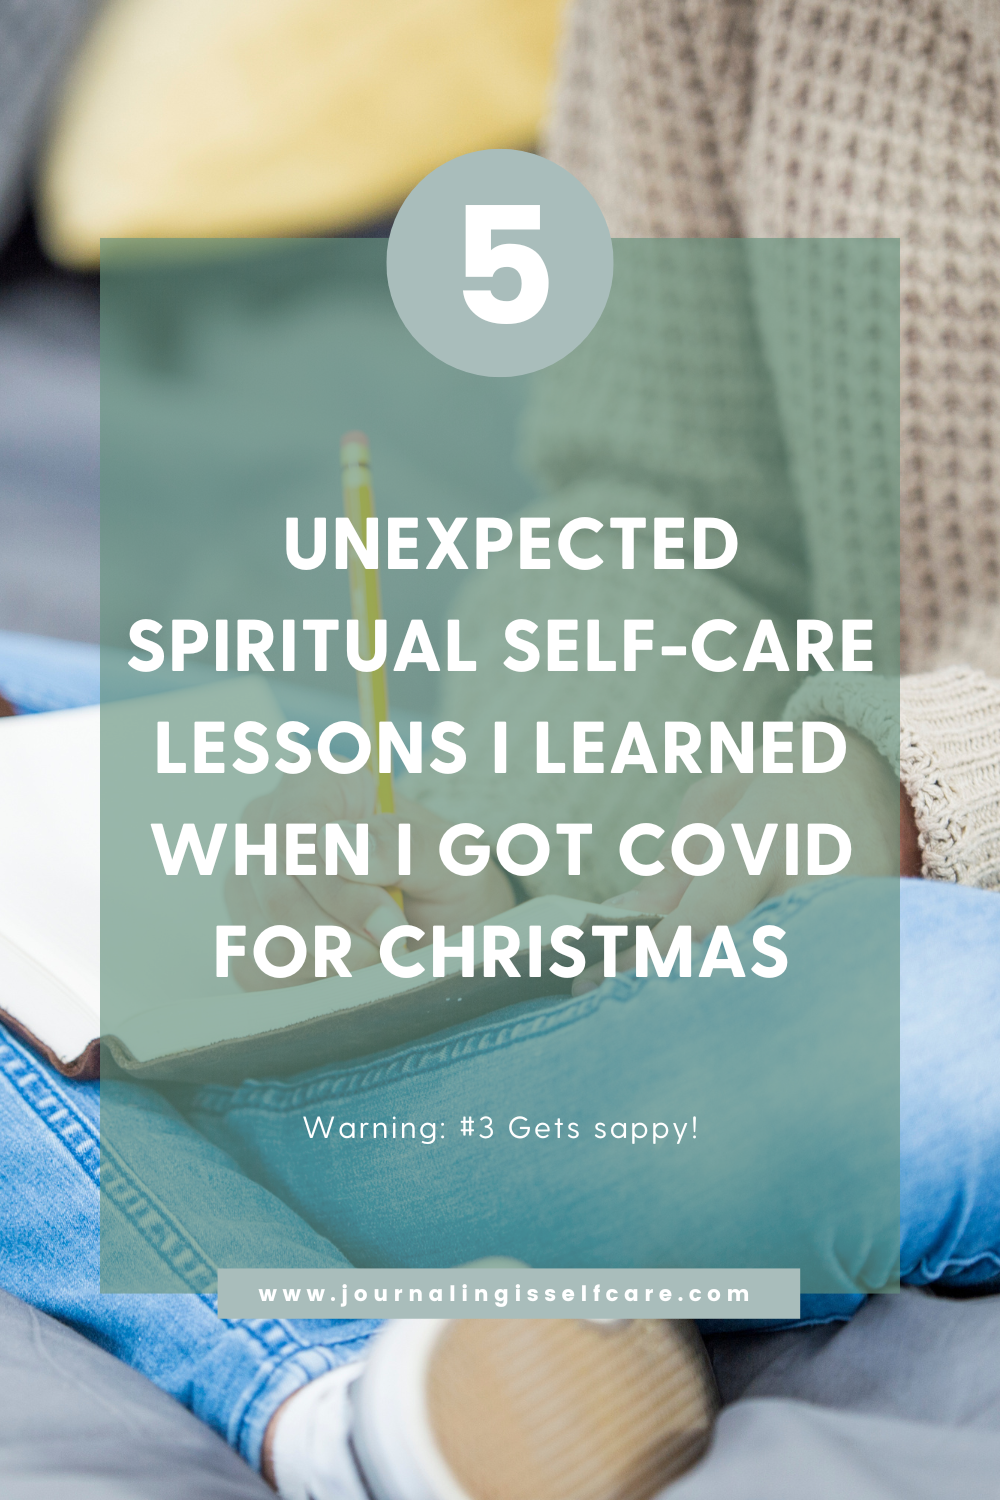 5 Unexpected Spiritual Self-Care Lessons I Learned When I Got Covid for Christmas